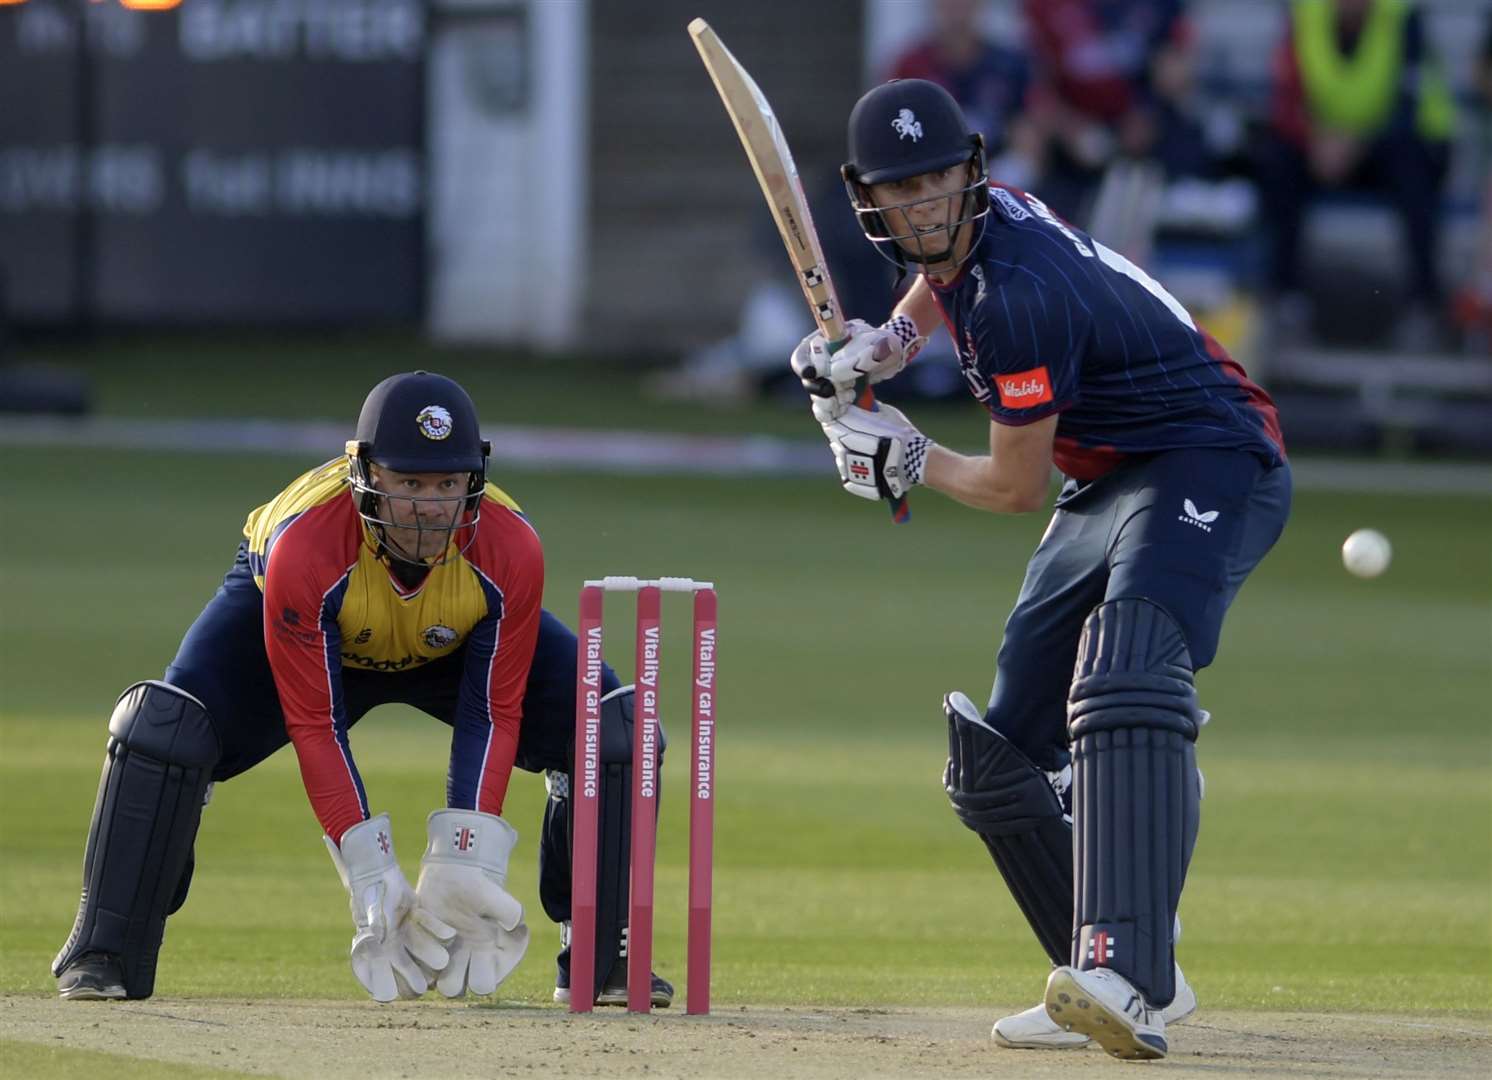 Zak Crawley on his way to 40 in 29 balls against Essex on Friday. Picture: Barry Goodwin